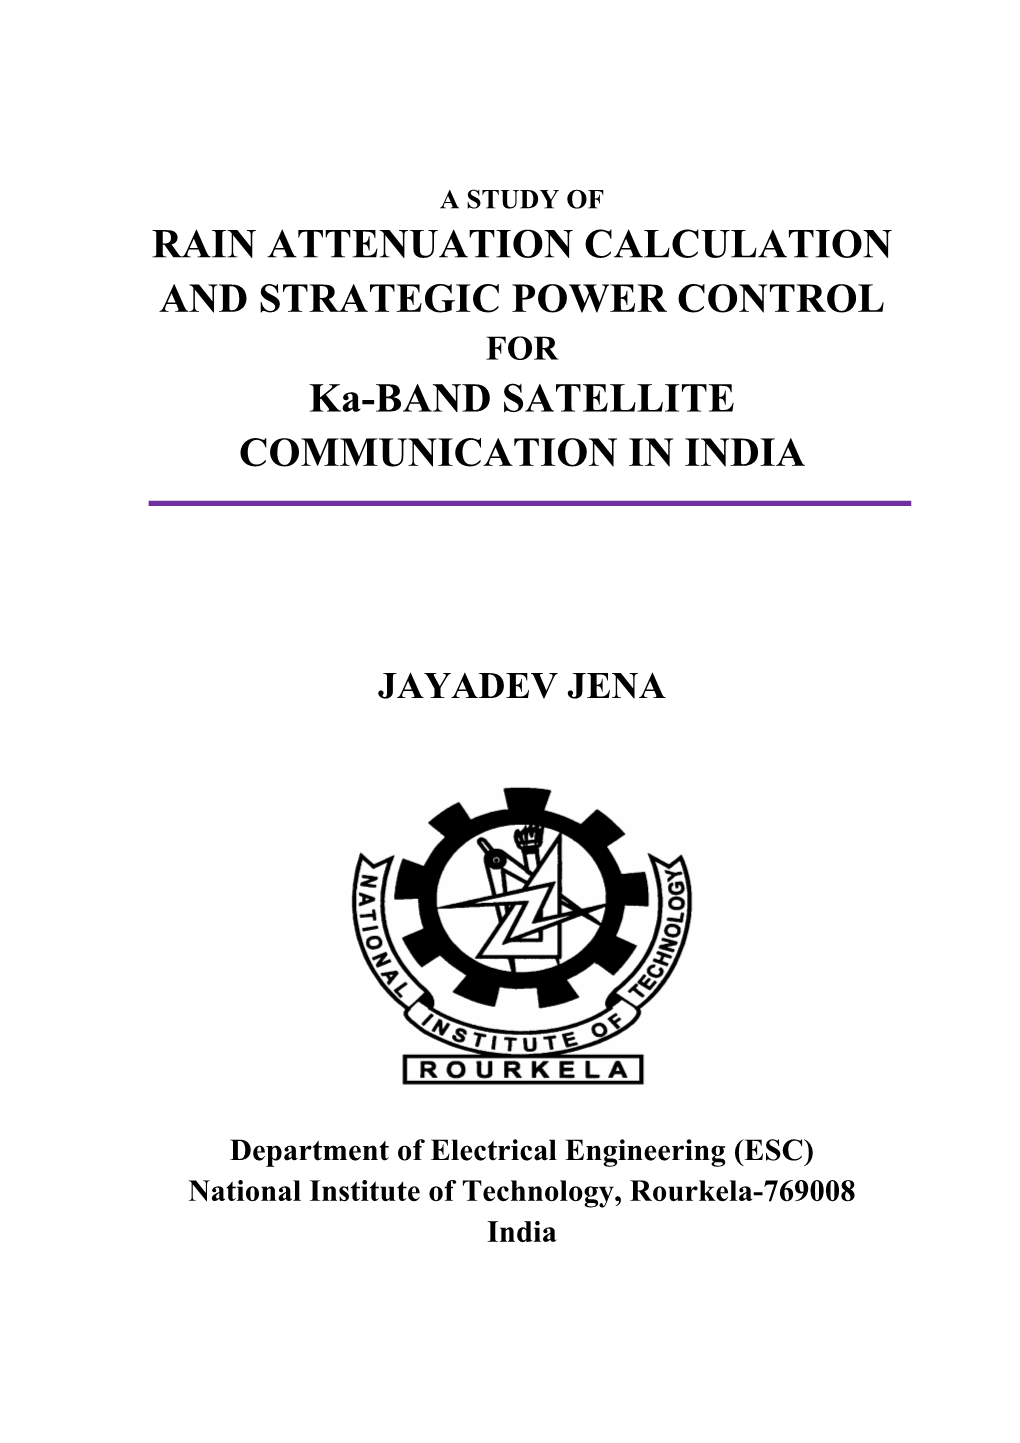 RAIN ATTENUATION CALCULATION and STRATEGIC POWER CONTROL for Ka-BAND SATELLITE COMMUNICATION in INDIA